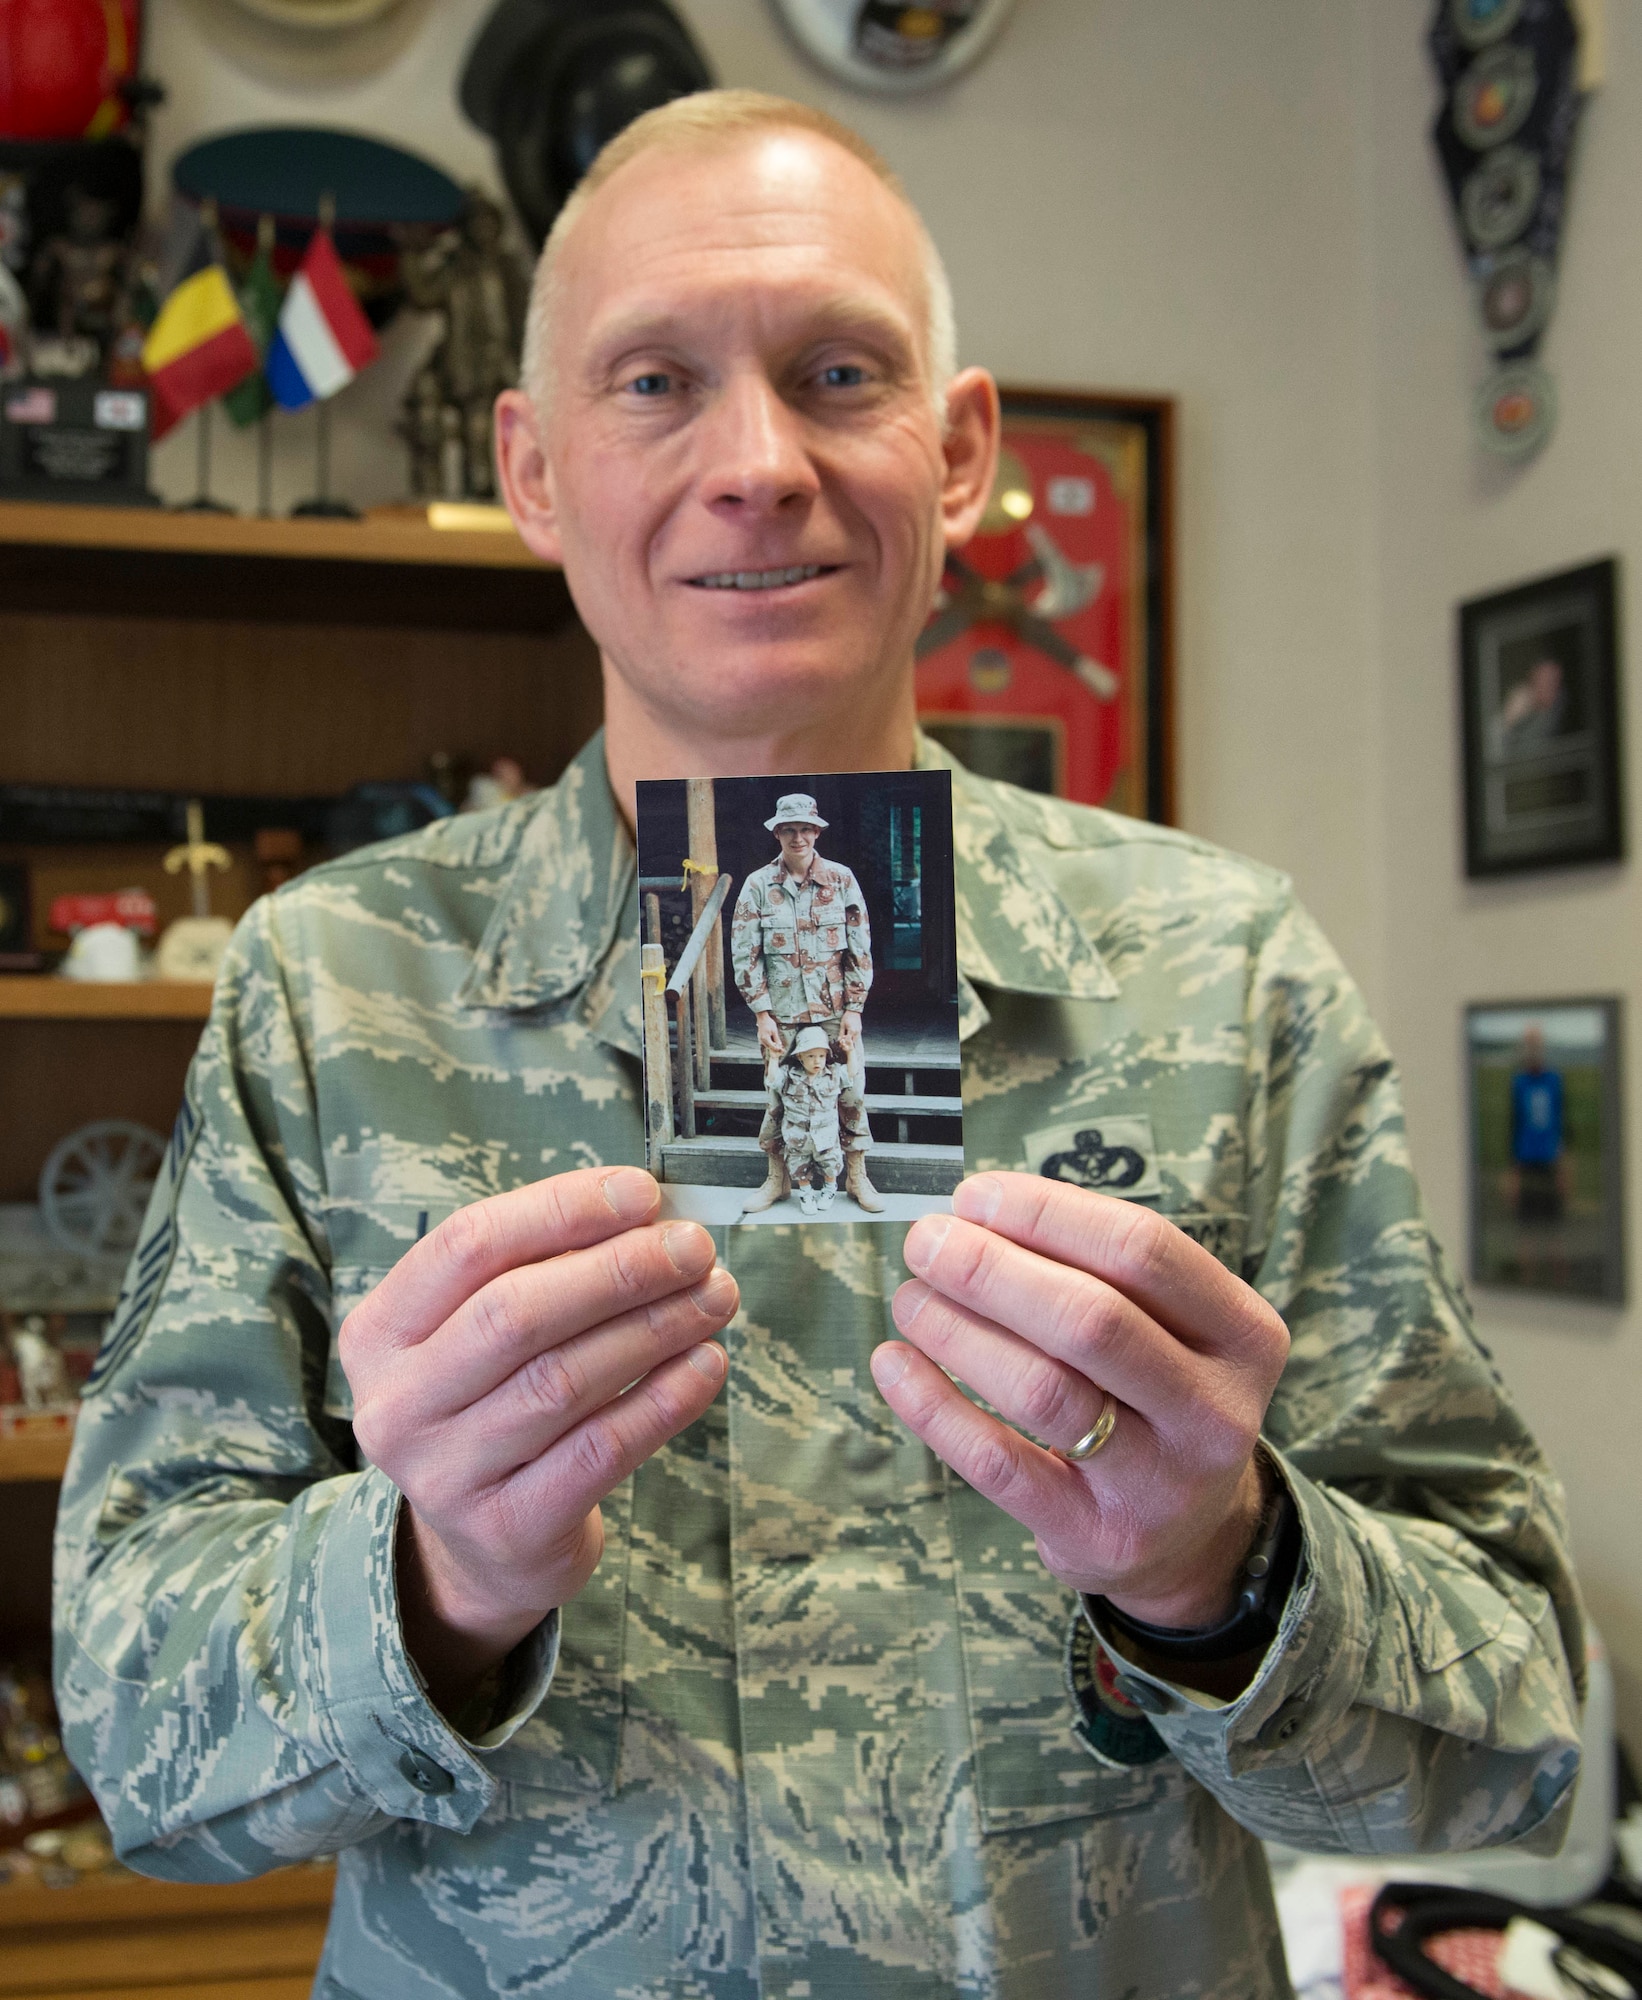 Chief Master Sgt. Richard Lien, 366th Civil Engineer Squadron fire department chief, holds a Desert Storm-era photo of himself with his oldest son, Jan. 13, 2016, at Mountain Home Air Force Base, Idaho. “I didn’t come home for a parade,” Lien said. “This is my victory parade, being with my oldest son.” (U.S. Air Force Photo by Airman Chester Mientkiewicz/RELEASED)